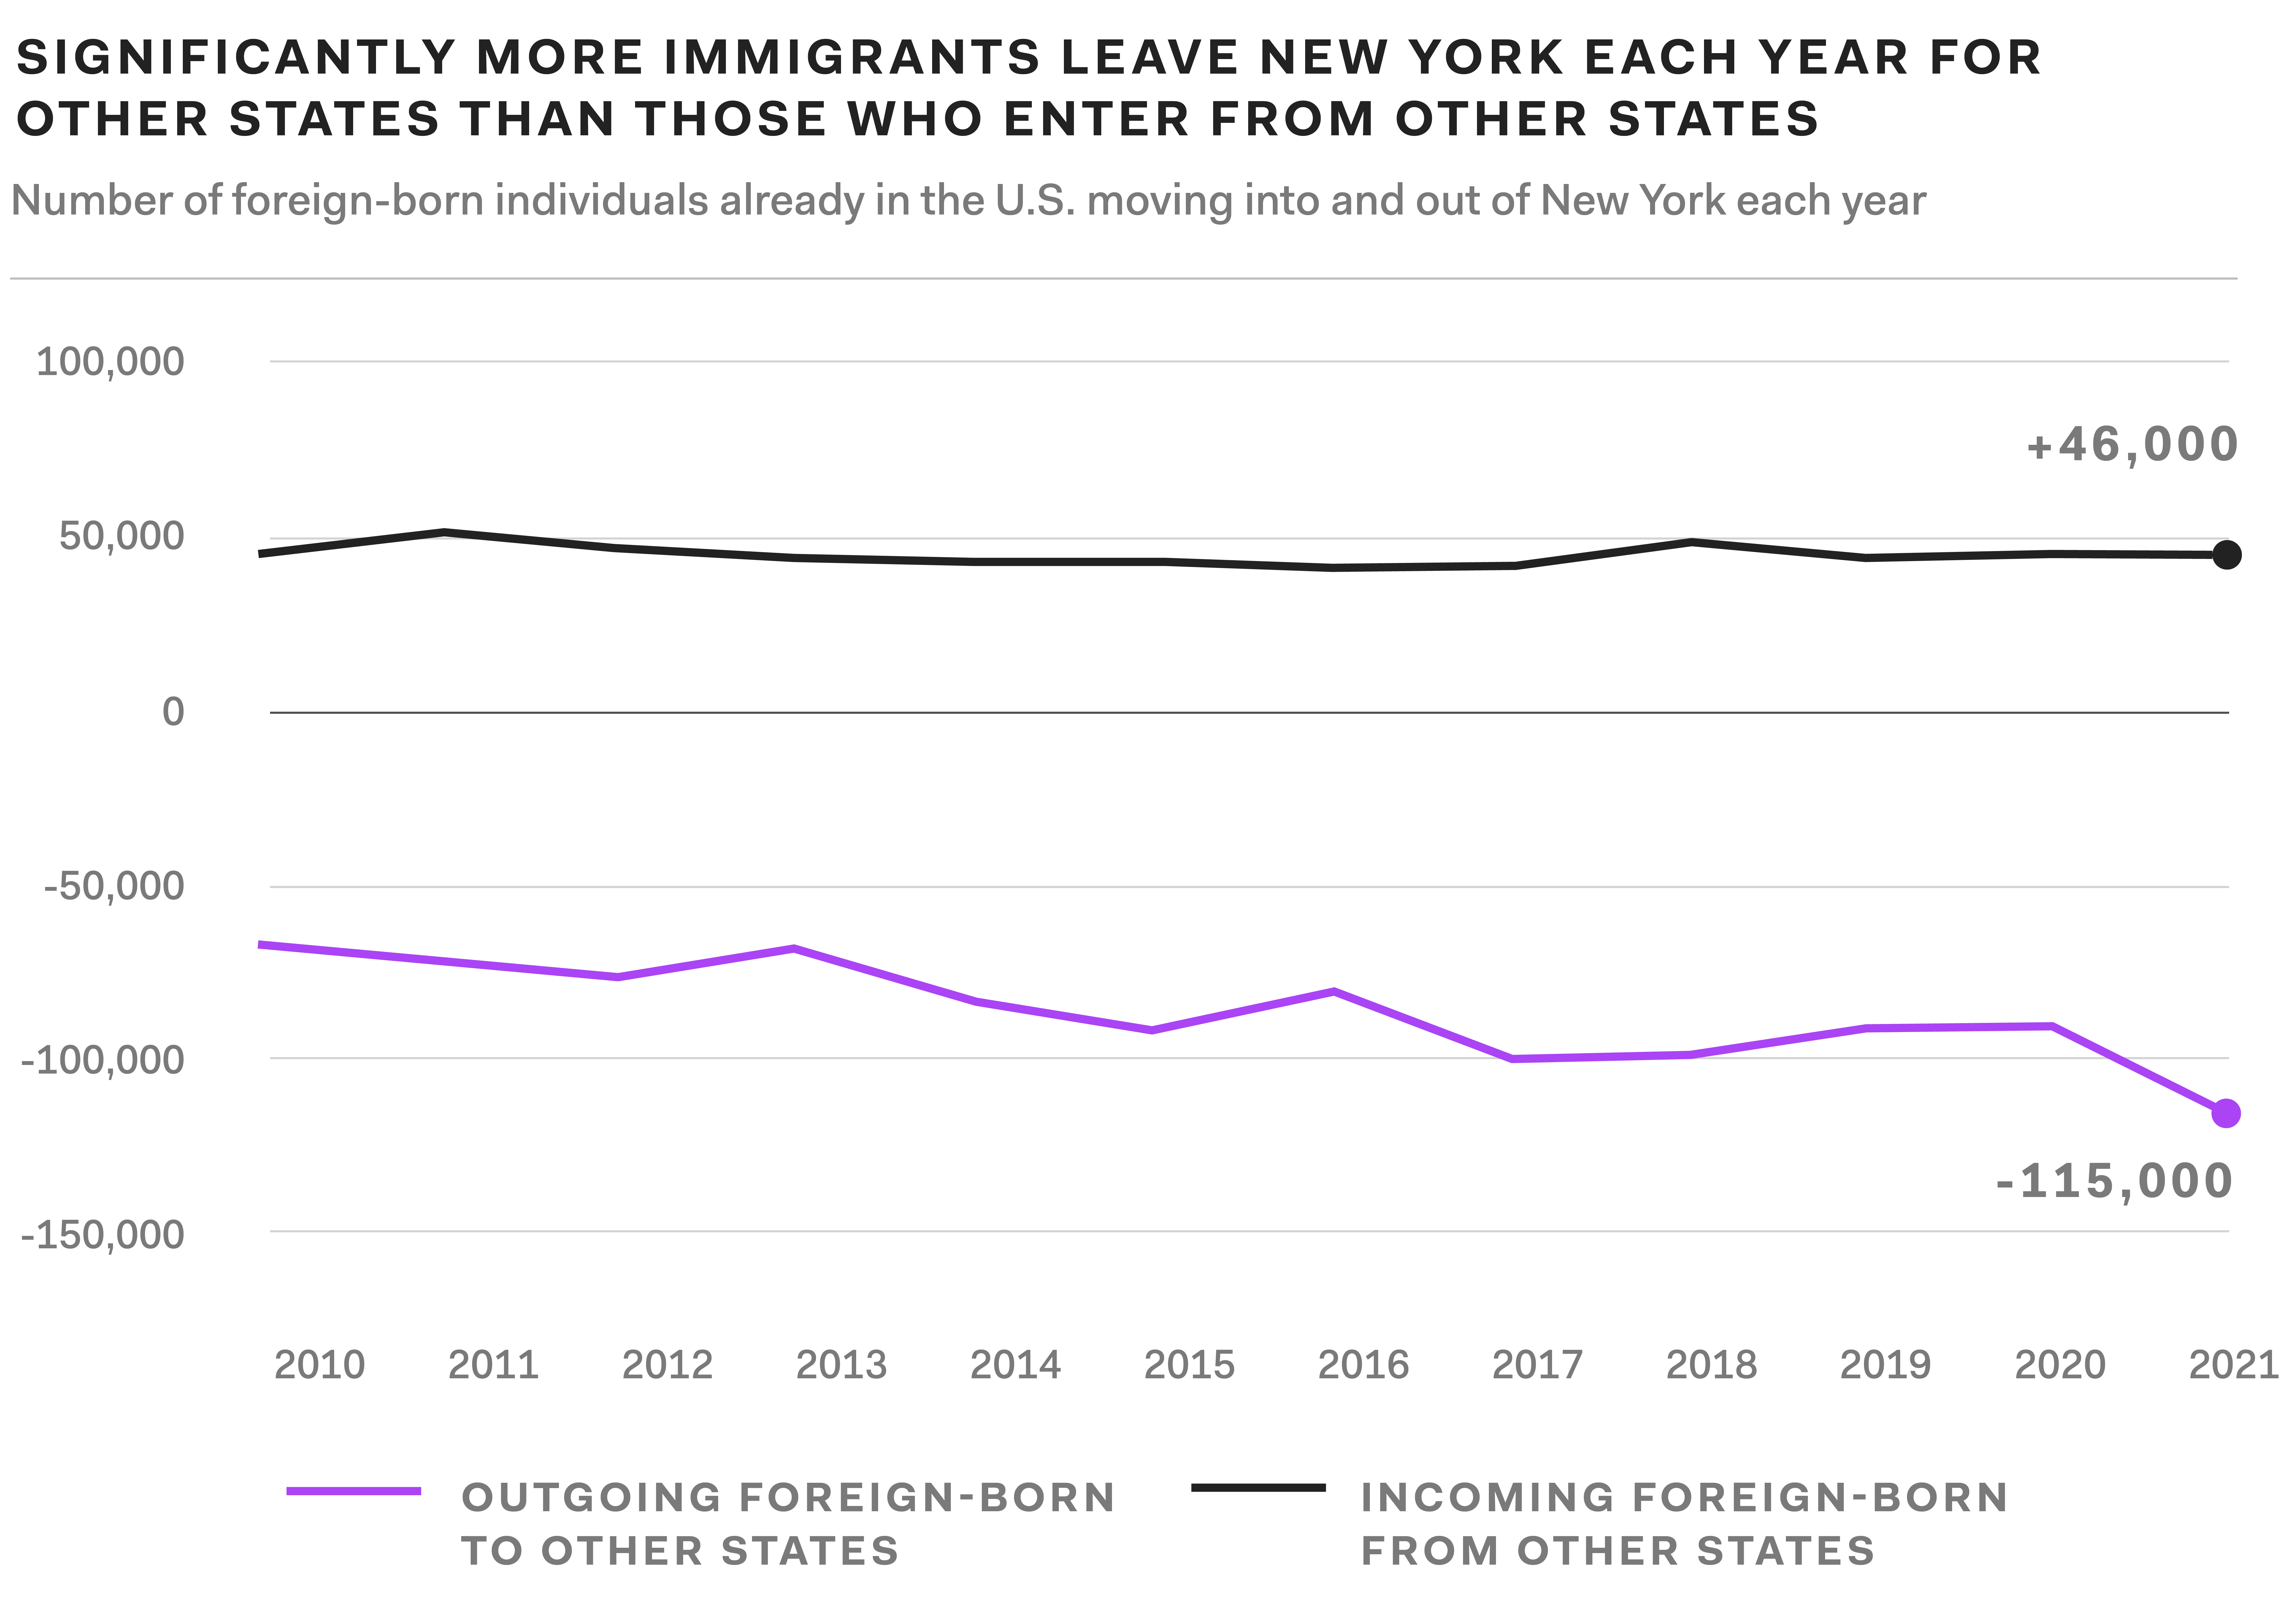 A line graph showing that significantly more foreign-born individuals leave New York for other states each year than enter New York from other states